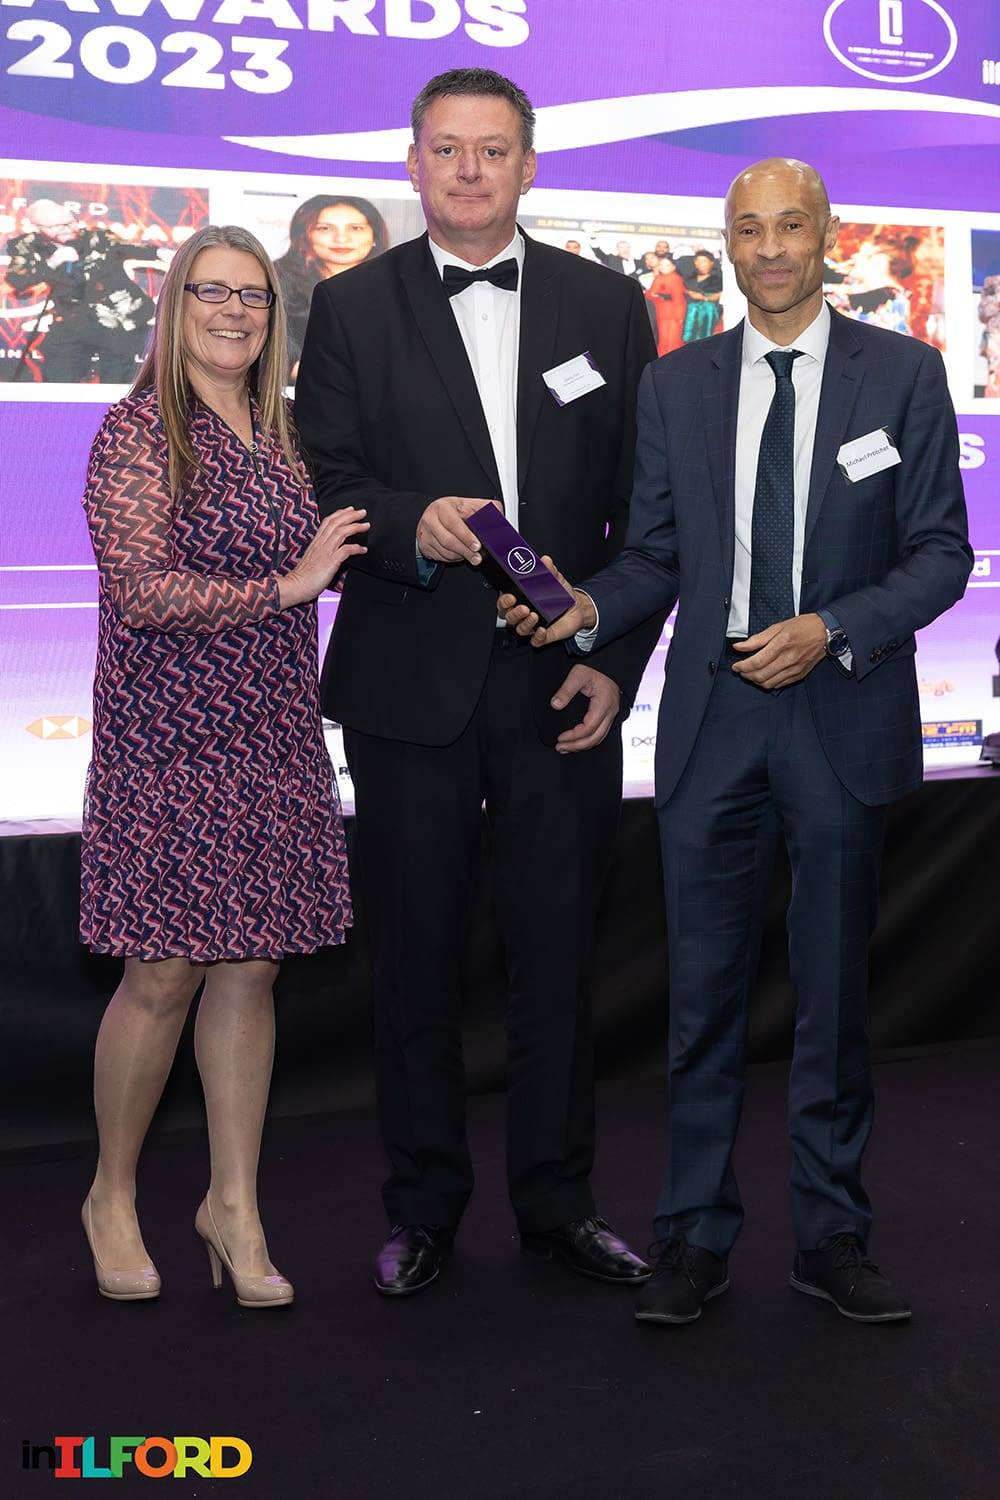 Ilford Business awards 2023